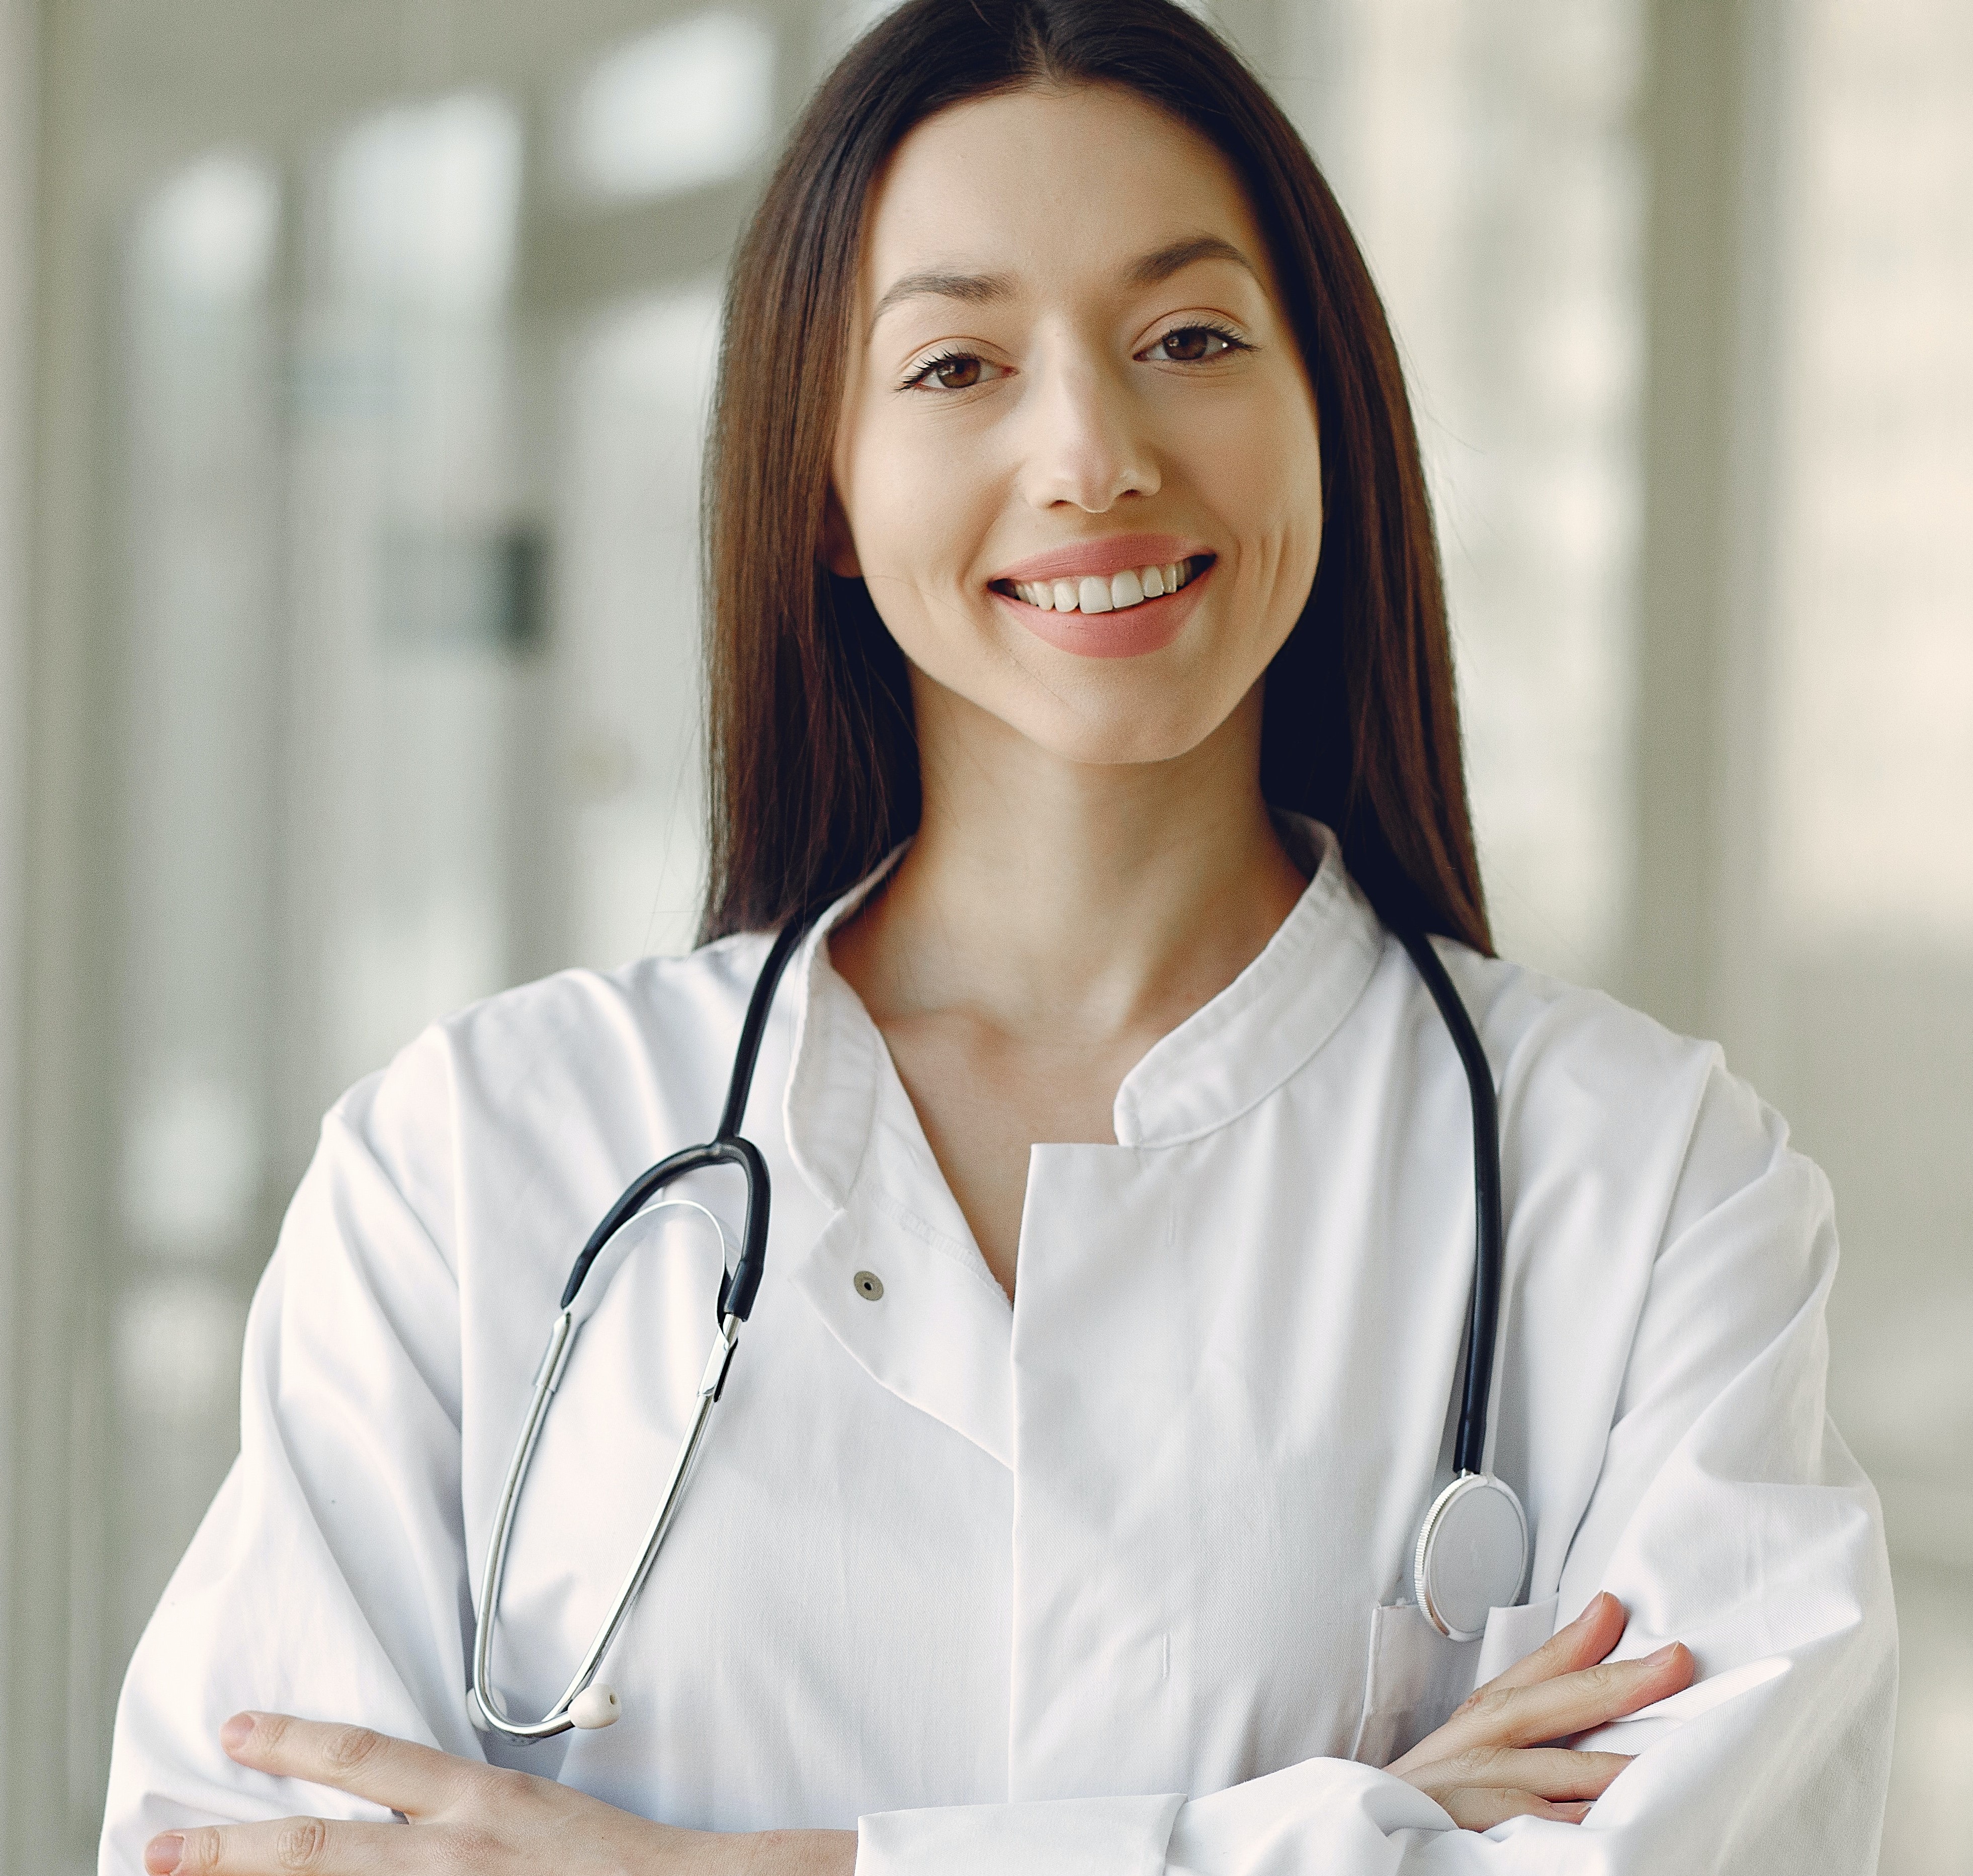 woman doctor smiling